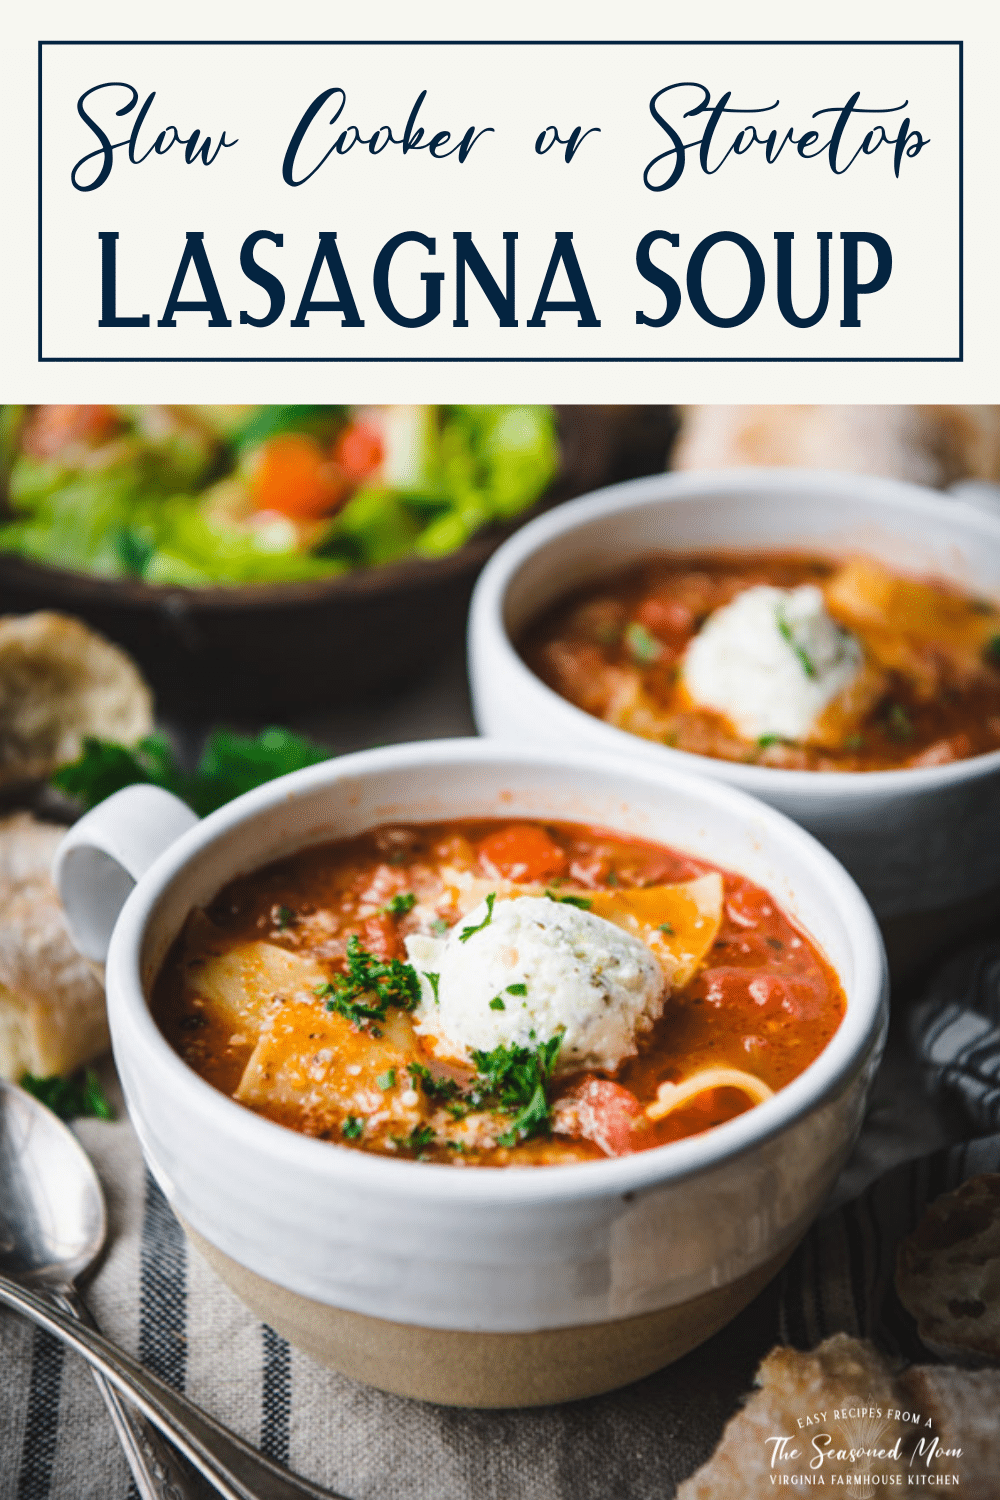 Lasagna Soup {Slow Cooker or Stovetop} - The Seasoned Mom